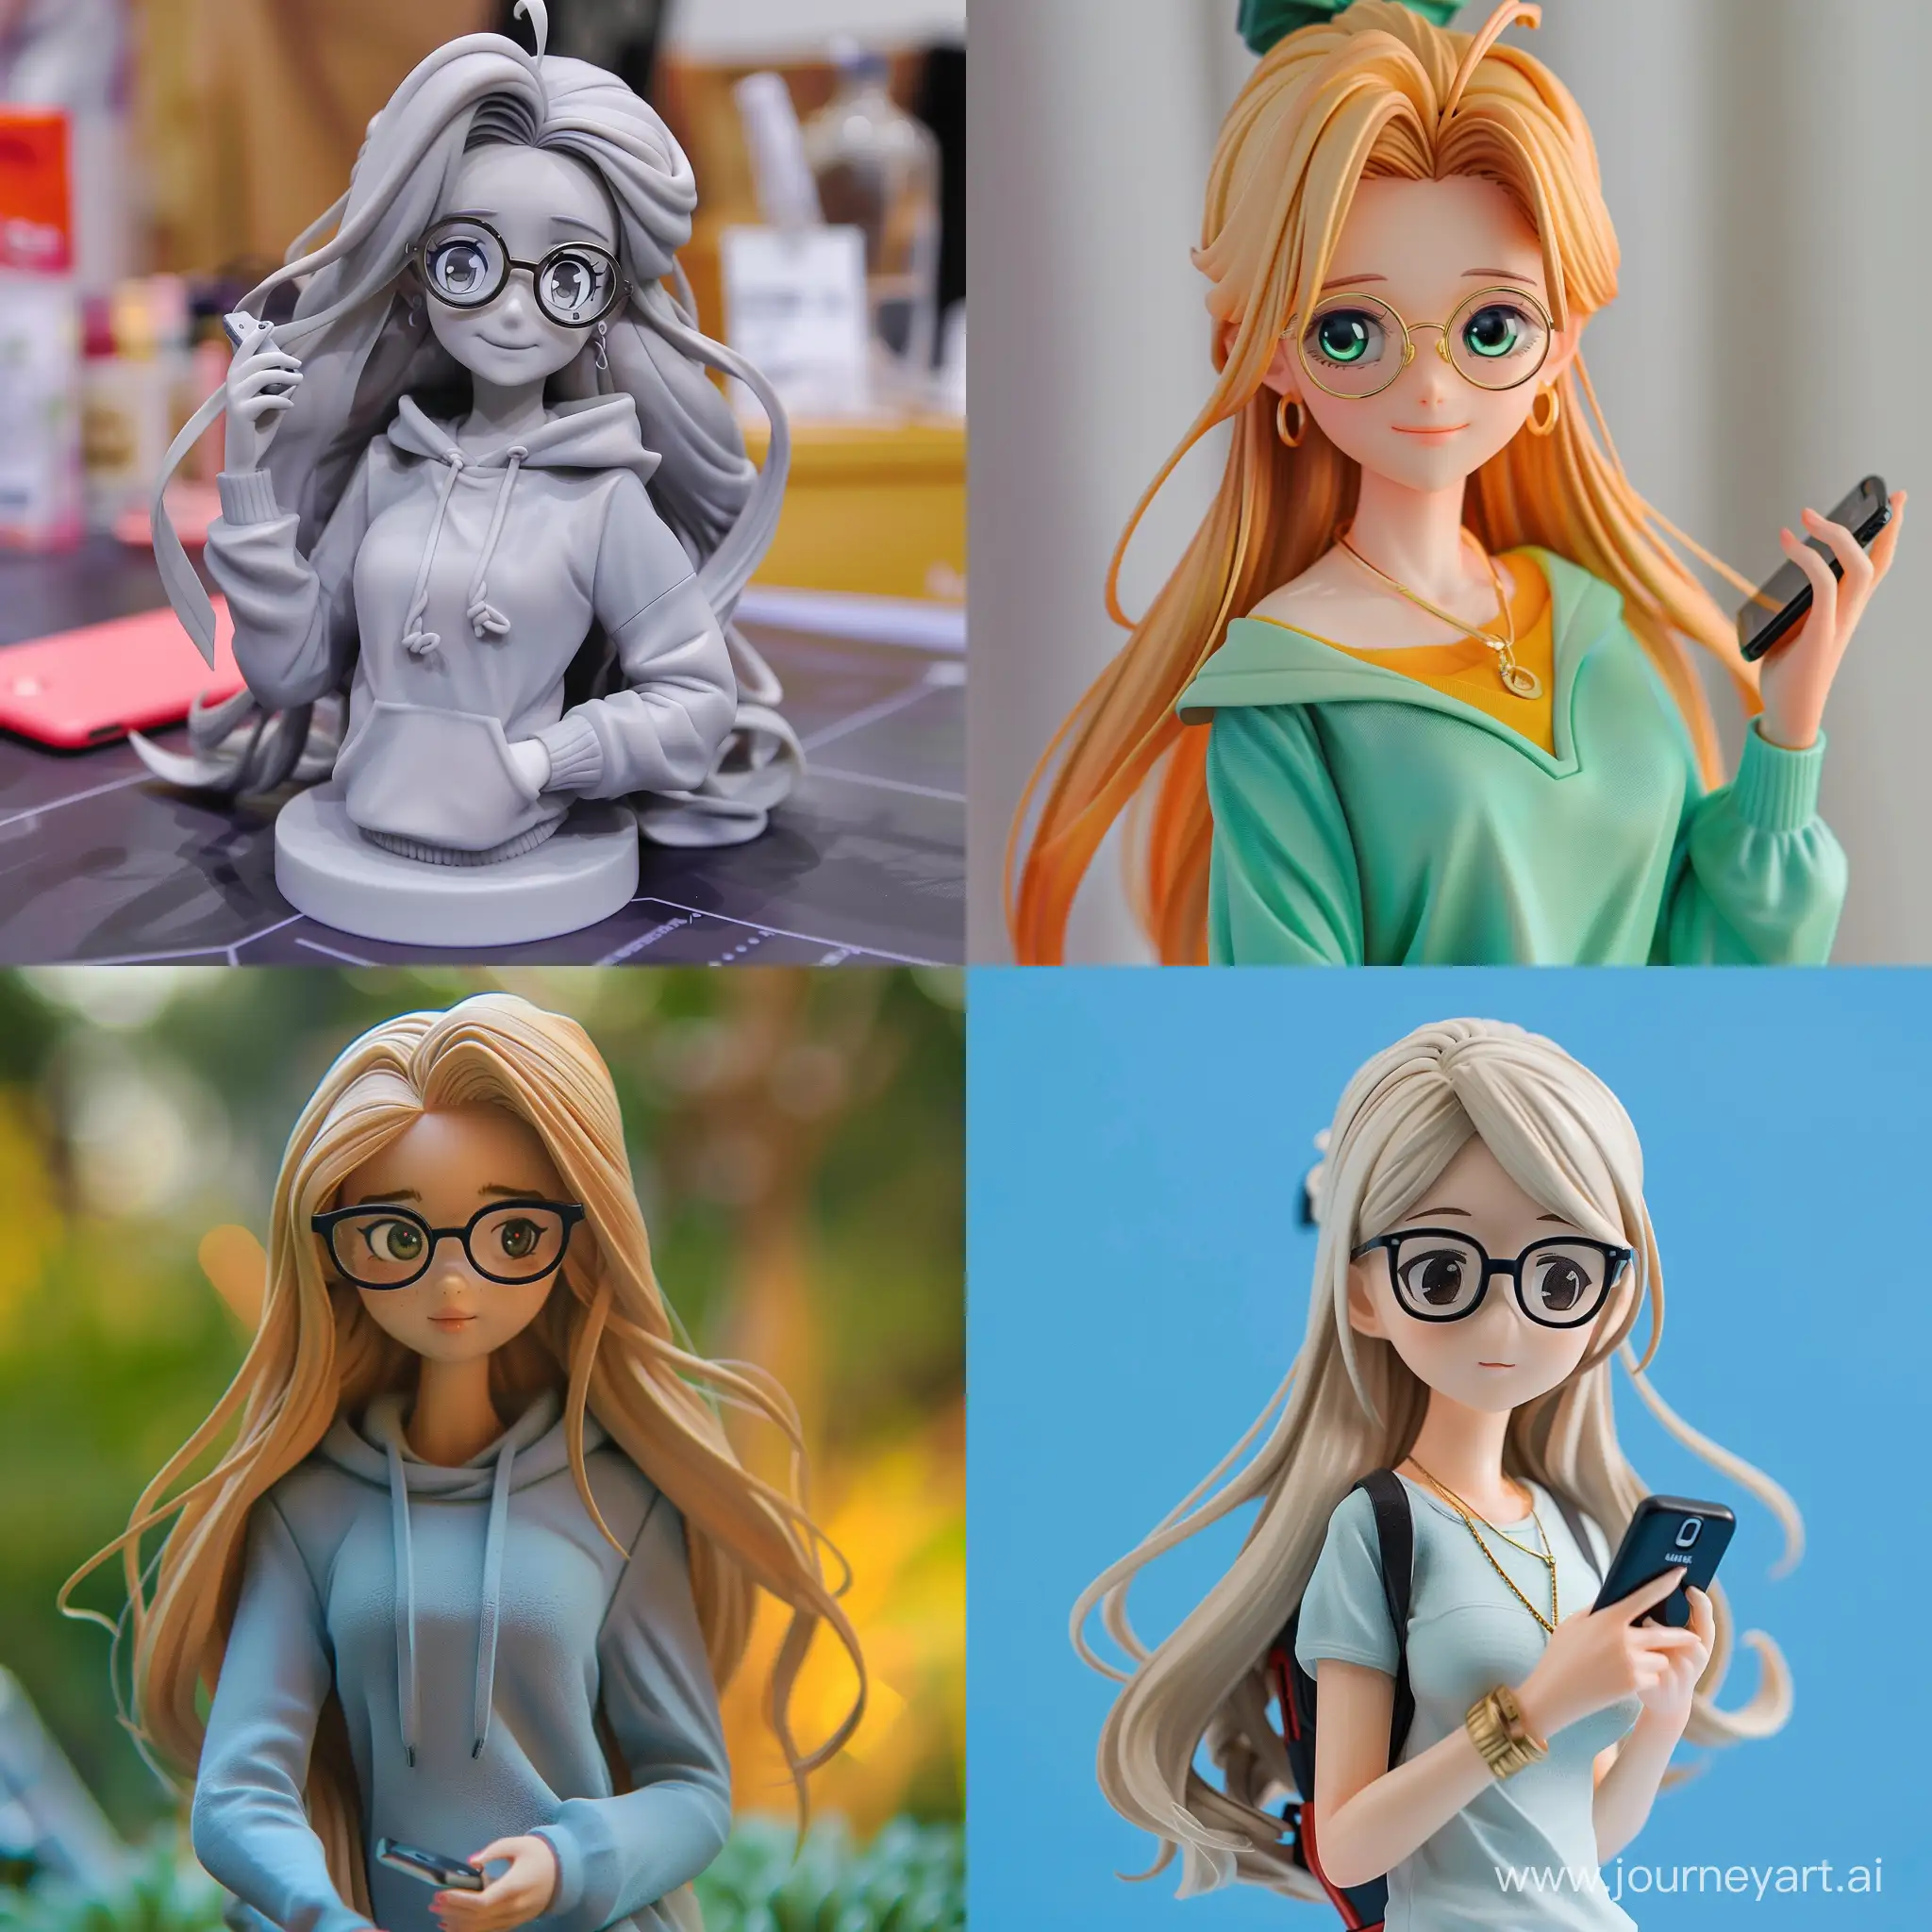 Disney-Style-Girl-with-Long-Light-Hair-Wearing-Glasses-and-Using-Phone